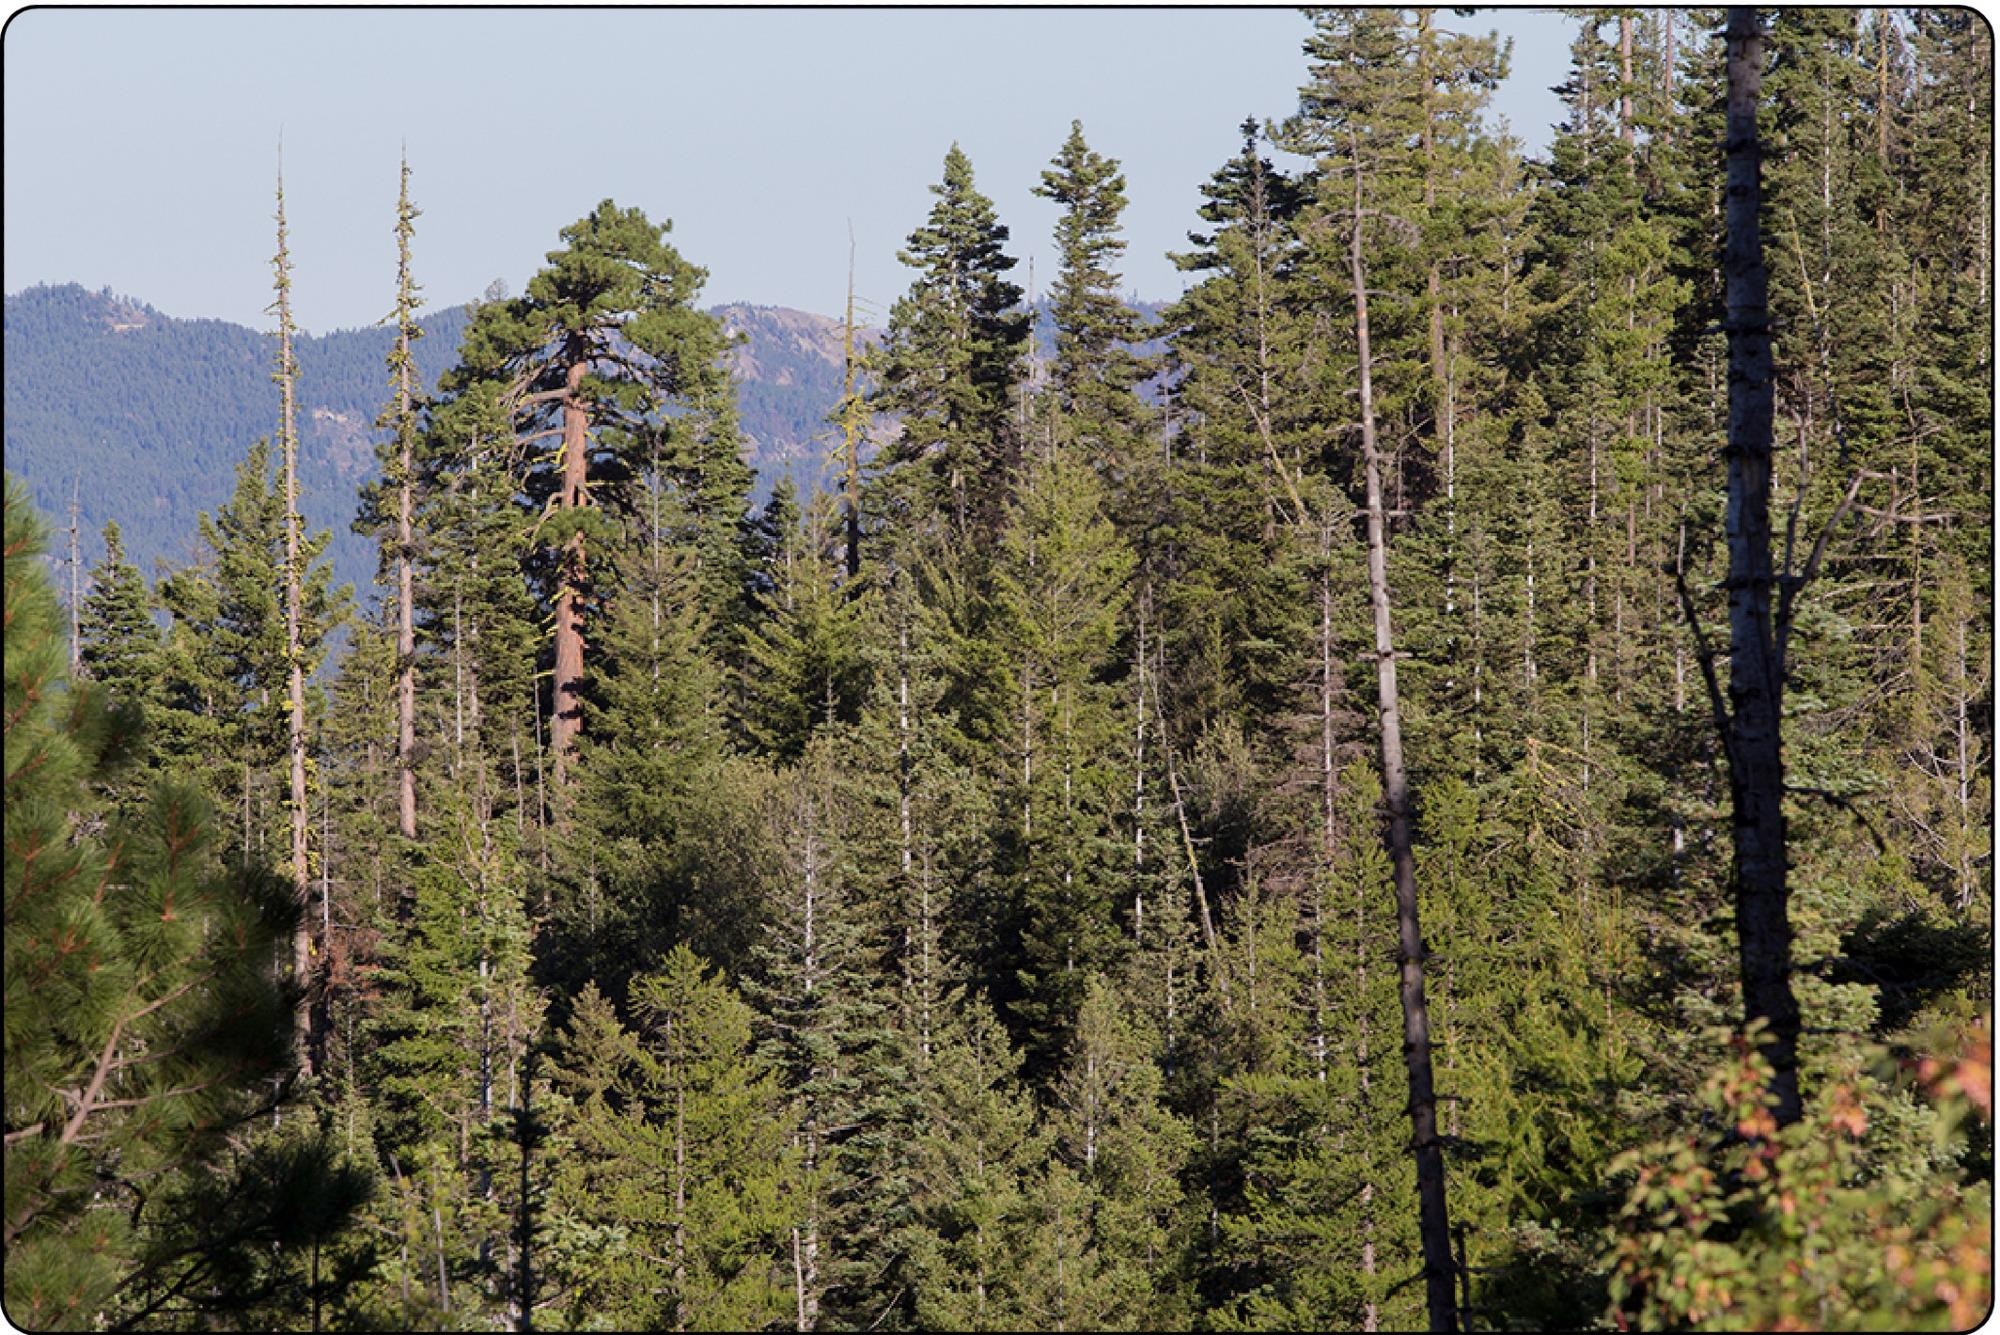 View near Tronsen Ridge (in the background), 2013, Okanogan-Wenatchee National Forest, Washington. Only a handful of trees in this scene were present 125 to 150 years ago. The largest ponderosa pines are 300 to 400 years old, developing under a frequent fire regime. Most other trees are fire-intolerant grand fir and Douglas fir that established over the period of livestock grazing and fire exclusion. A few dwarf mistletoe infested younger western larch are dead in this scene owing to extreme intertree competition for soil moisture and nutrients, and mistletoe infection severity.